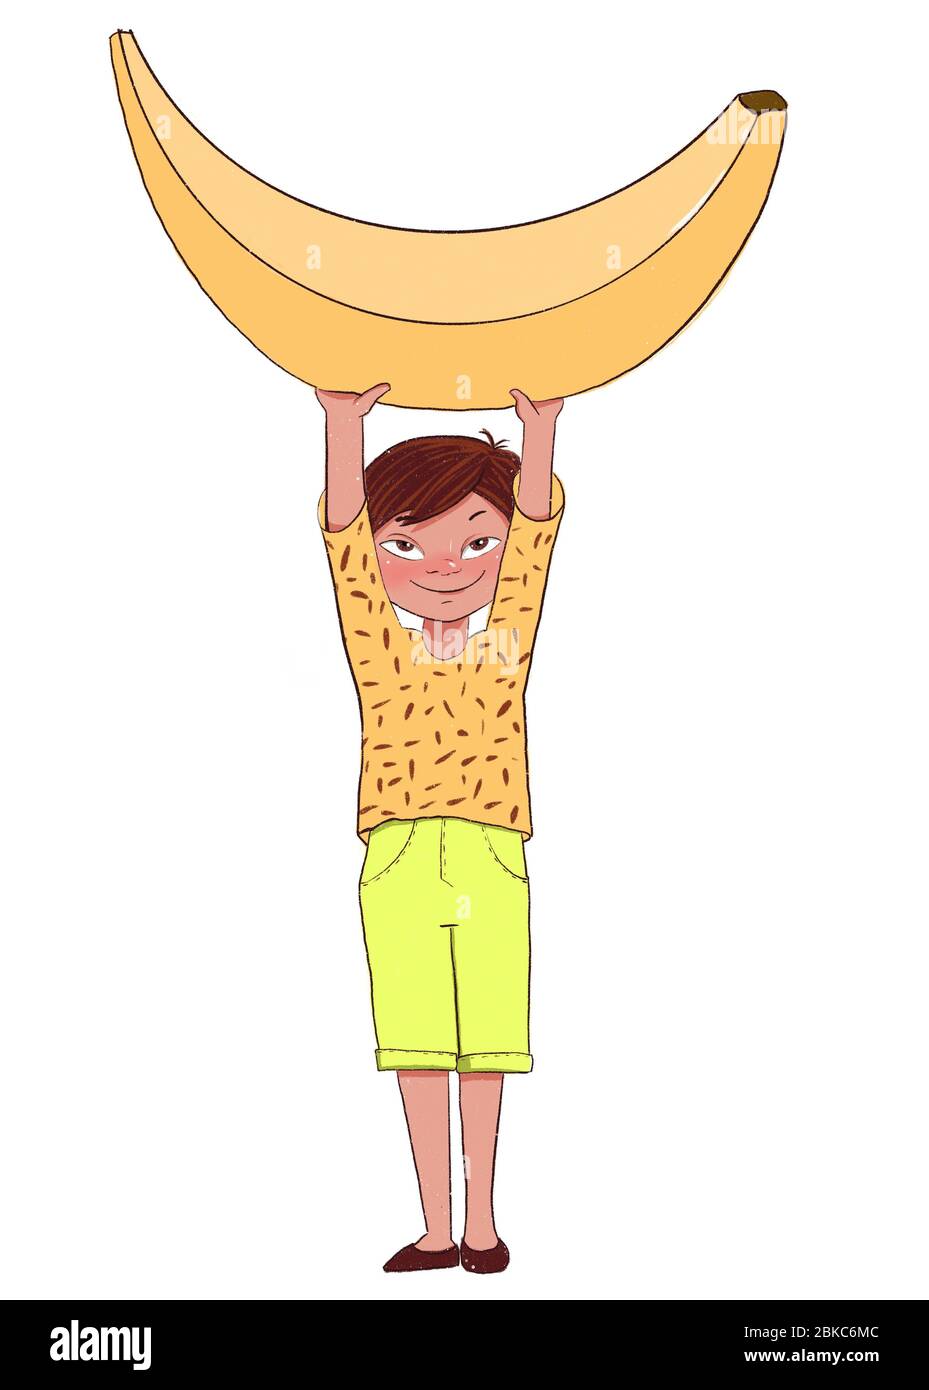 Smiling boy holds a banana. Children love fruit. Cute character in cartoon style illustration on white background. Stock Photo